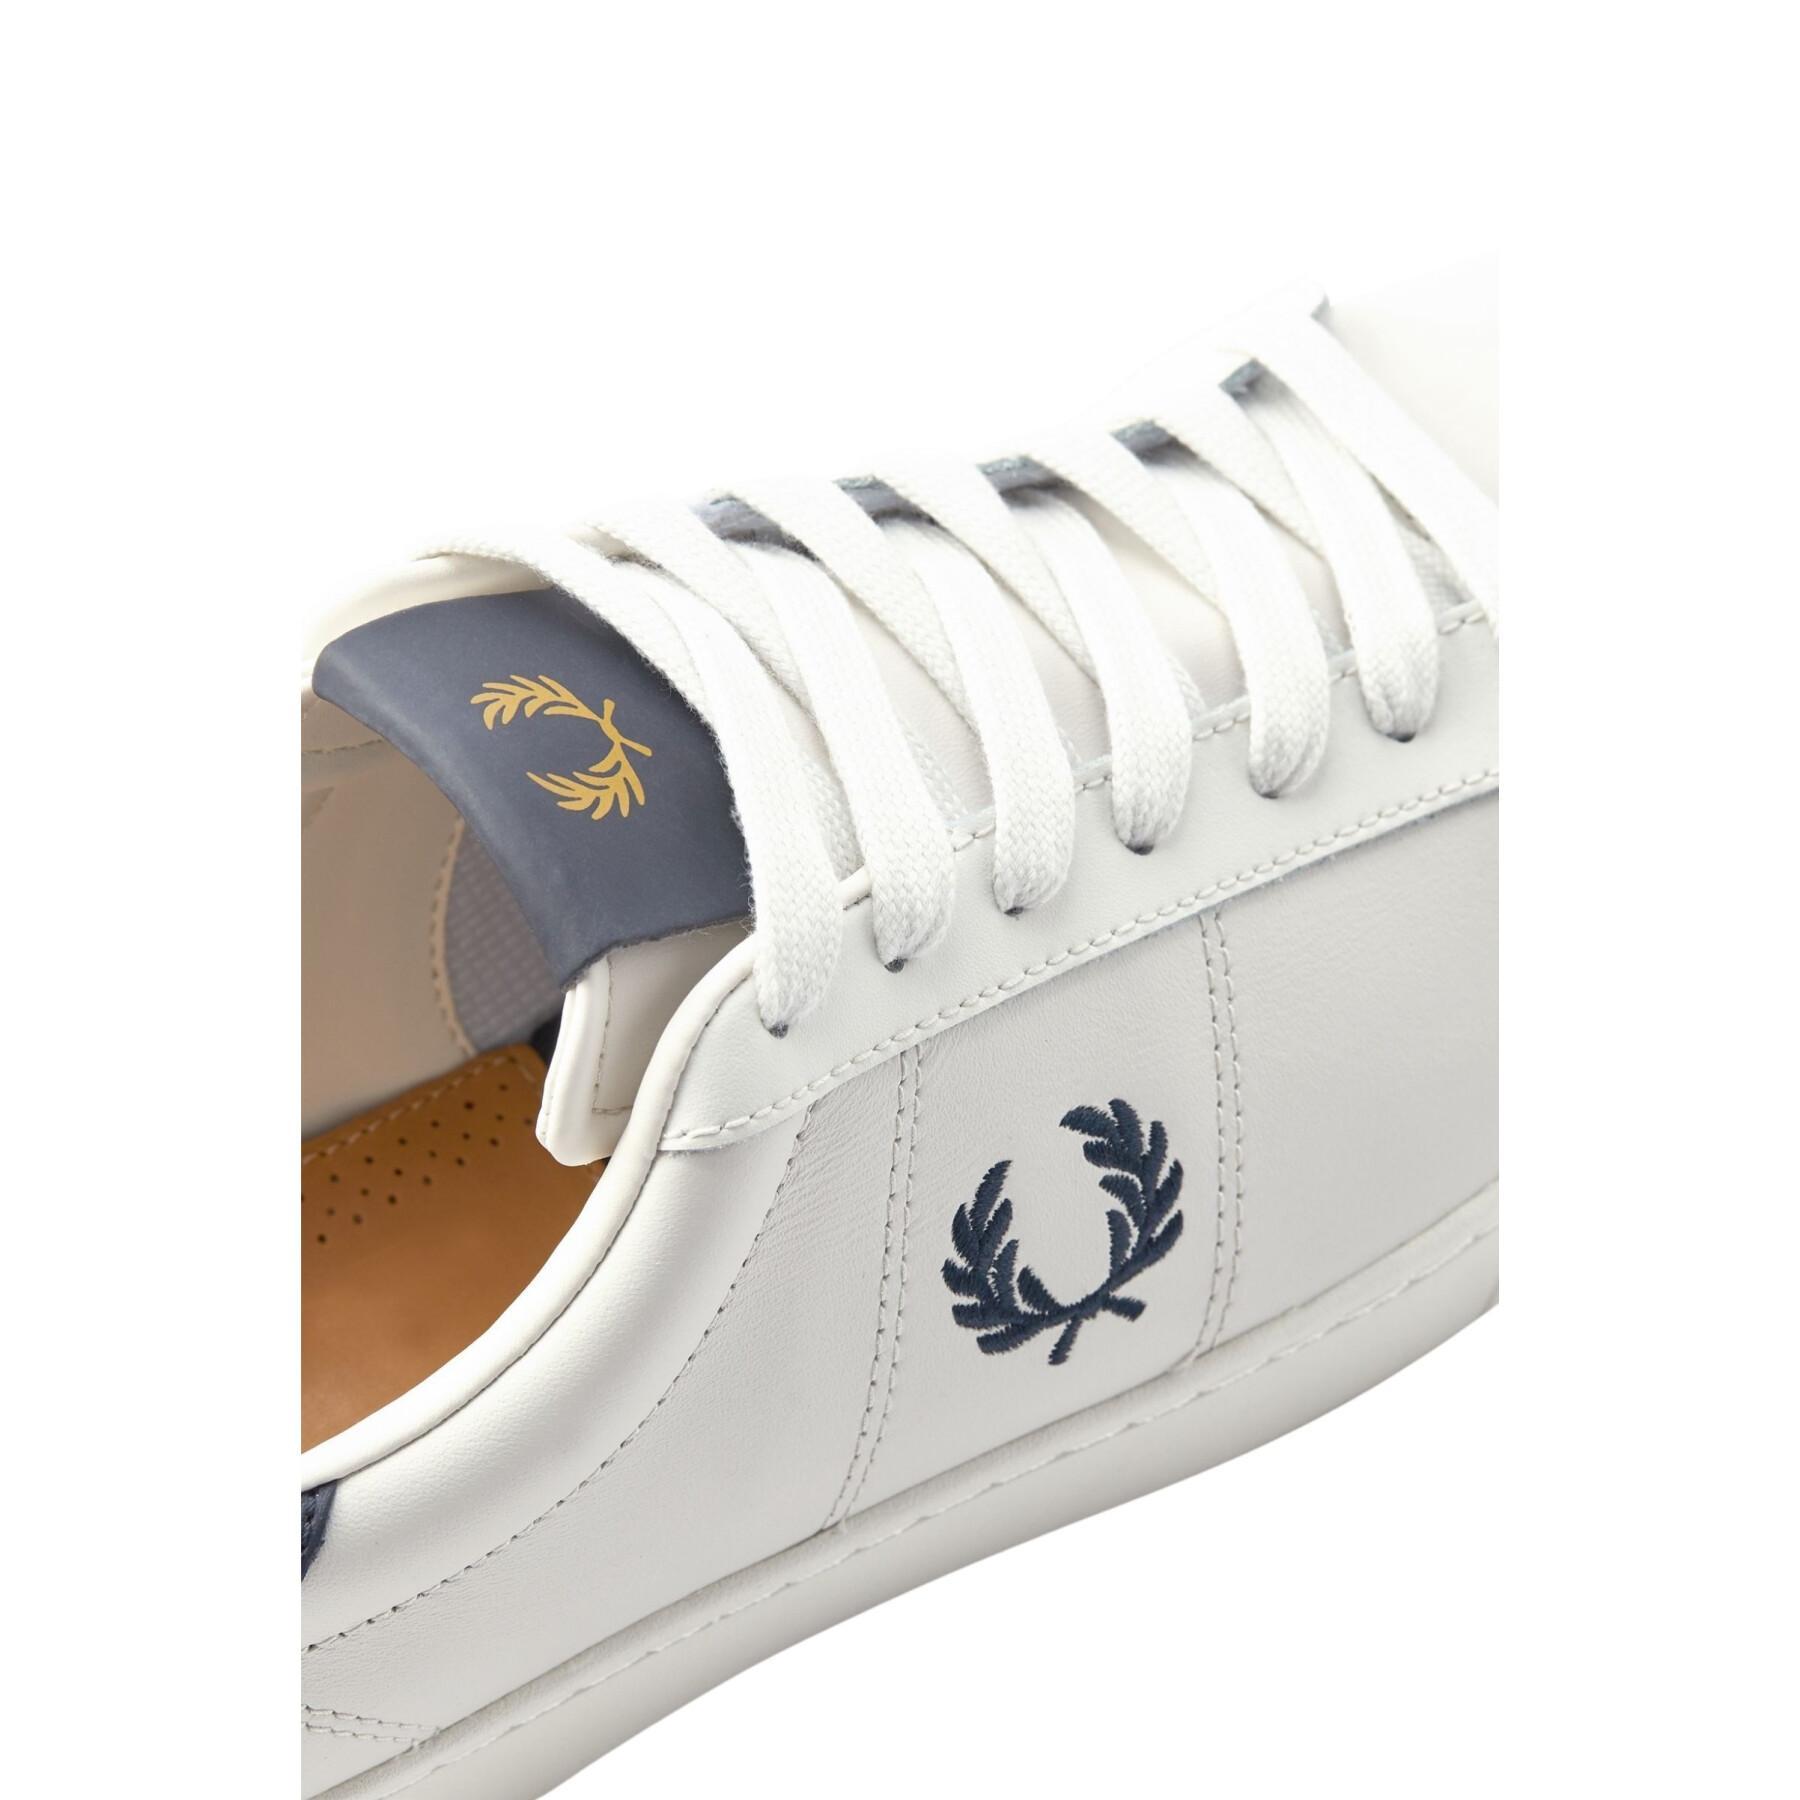 Baskets Fred Perry Spencer Leather